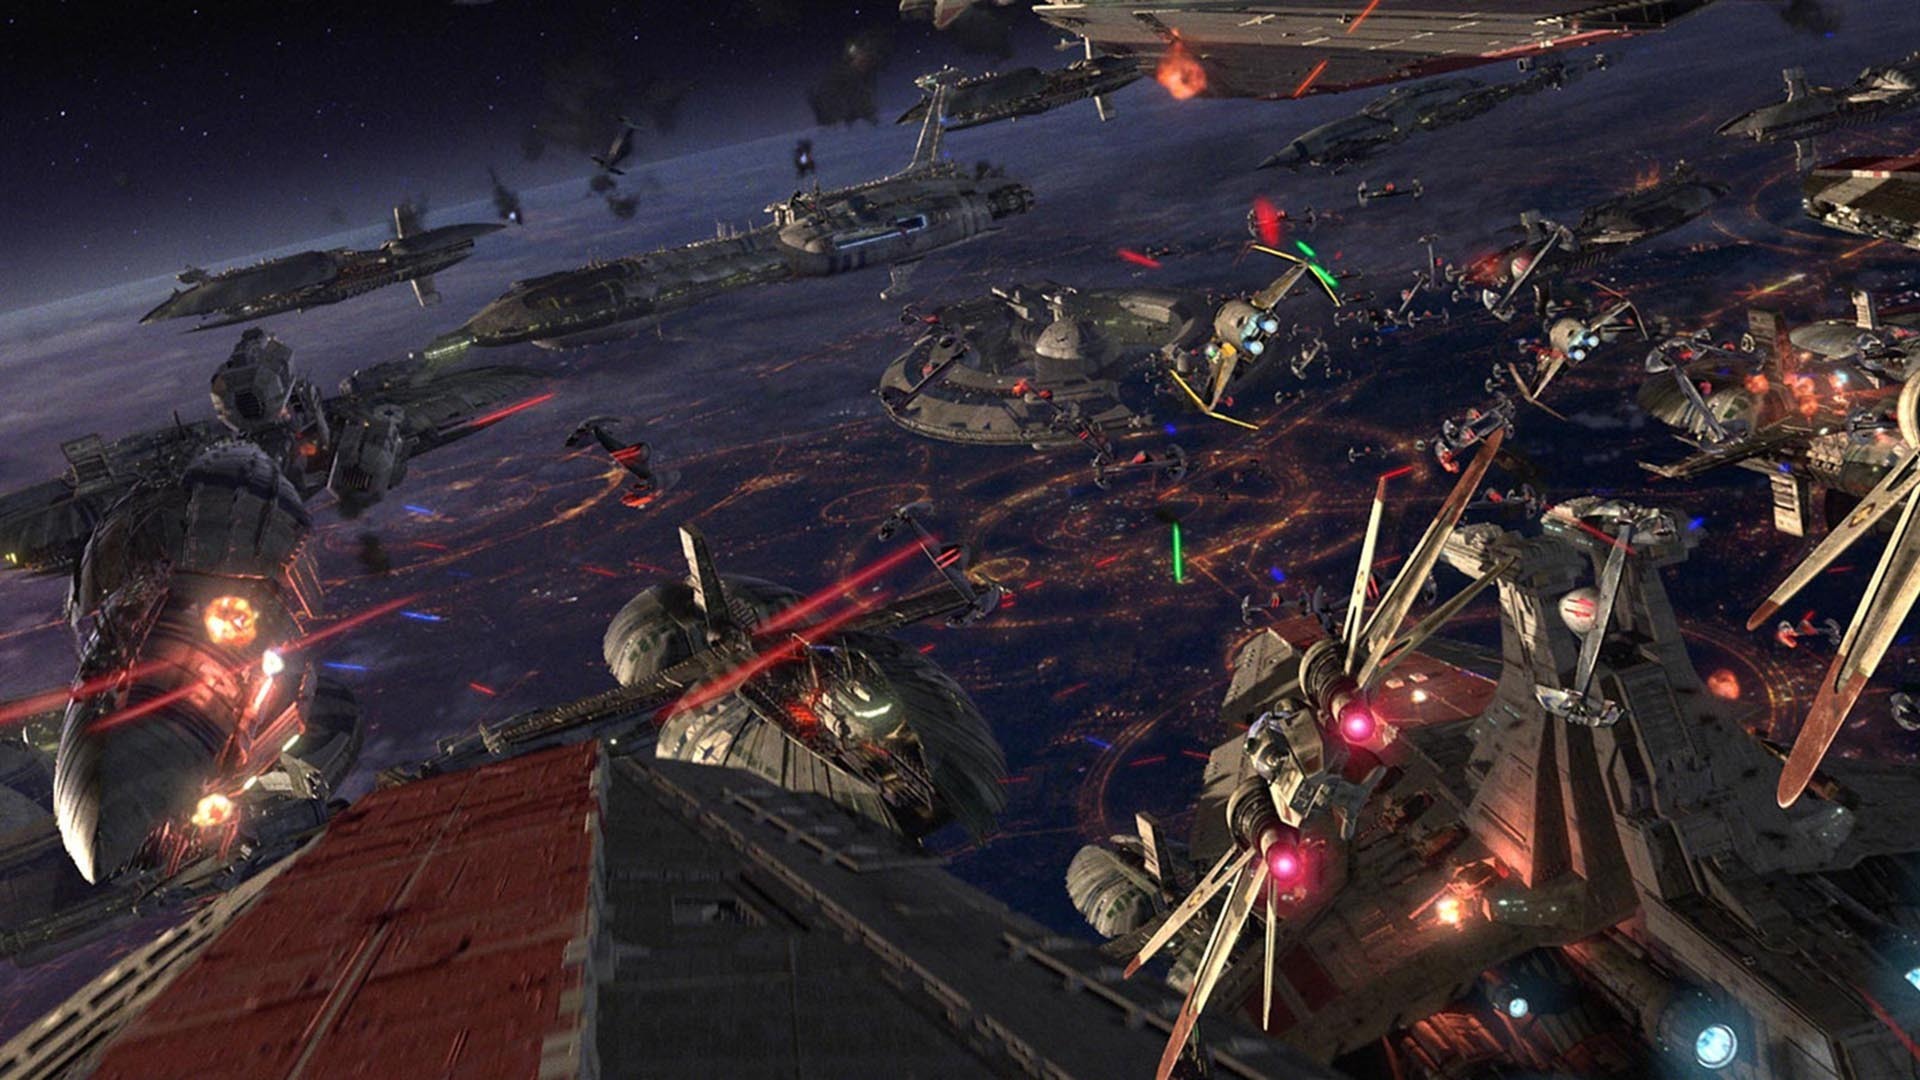 Star Wars Ep. III: Revenge of the Sith for ios download